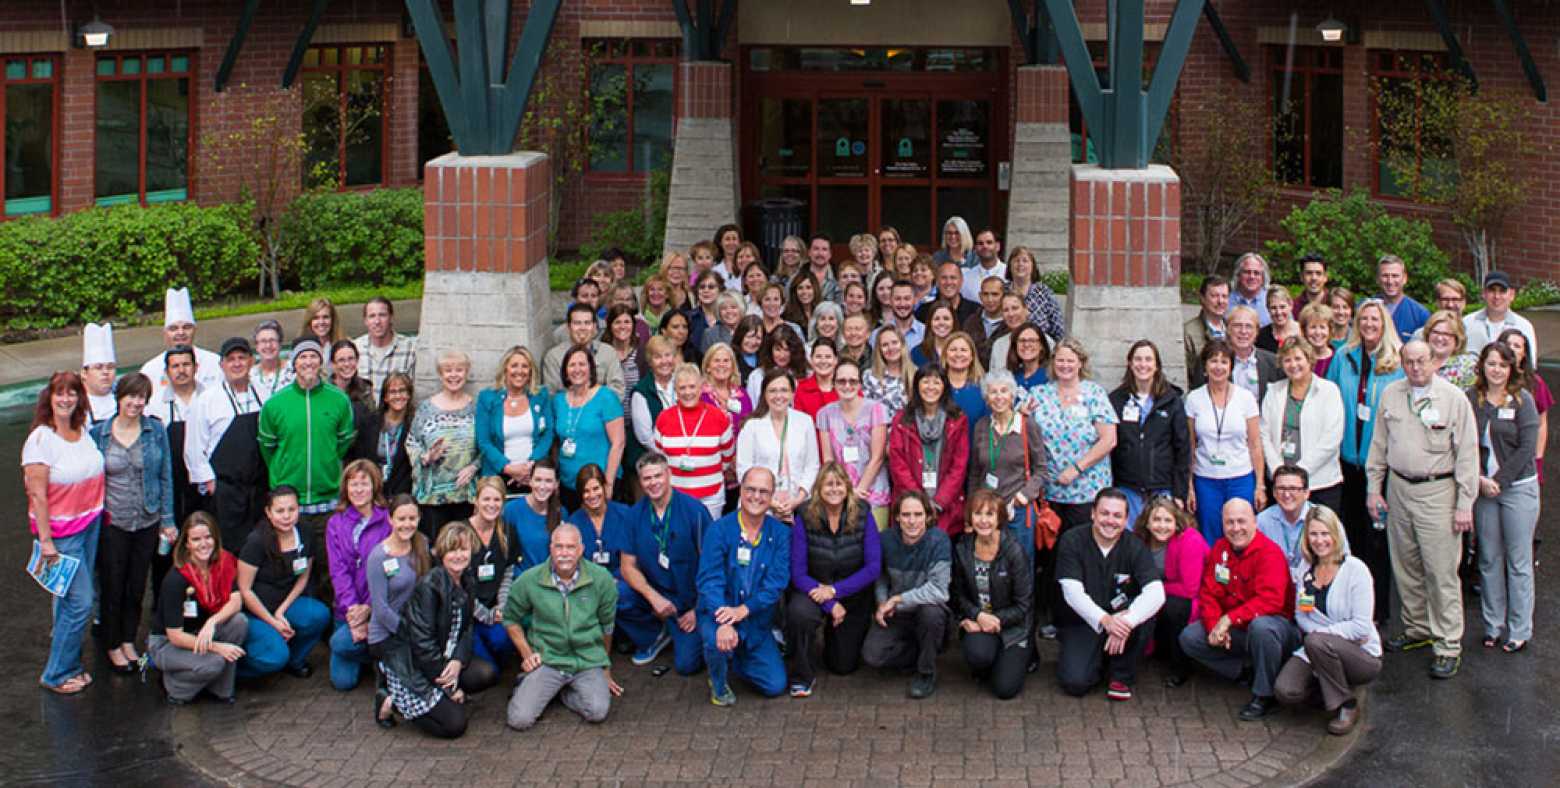 tahoe forest hospital staff in front of hospital